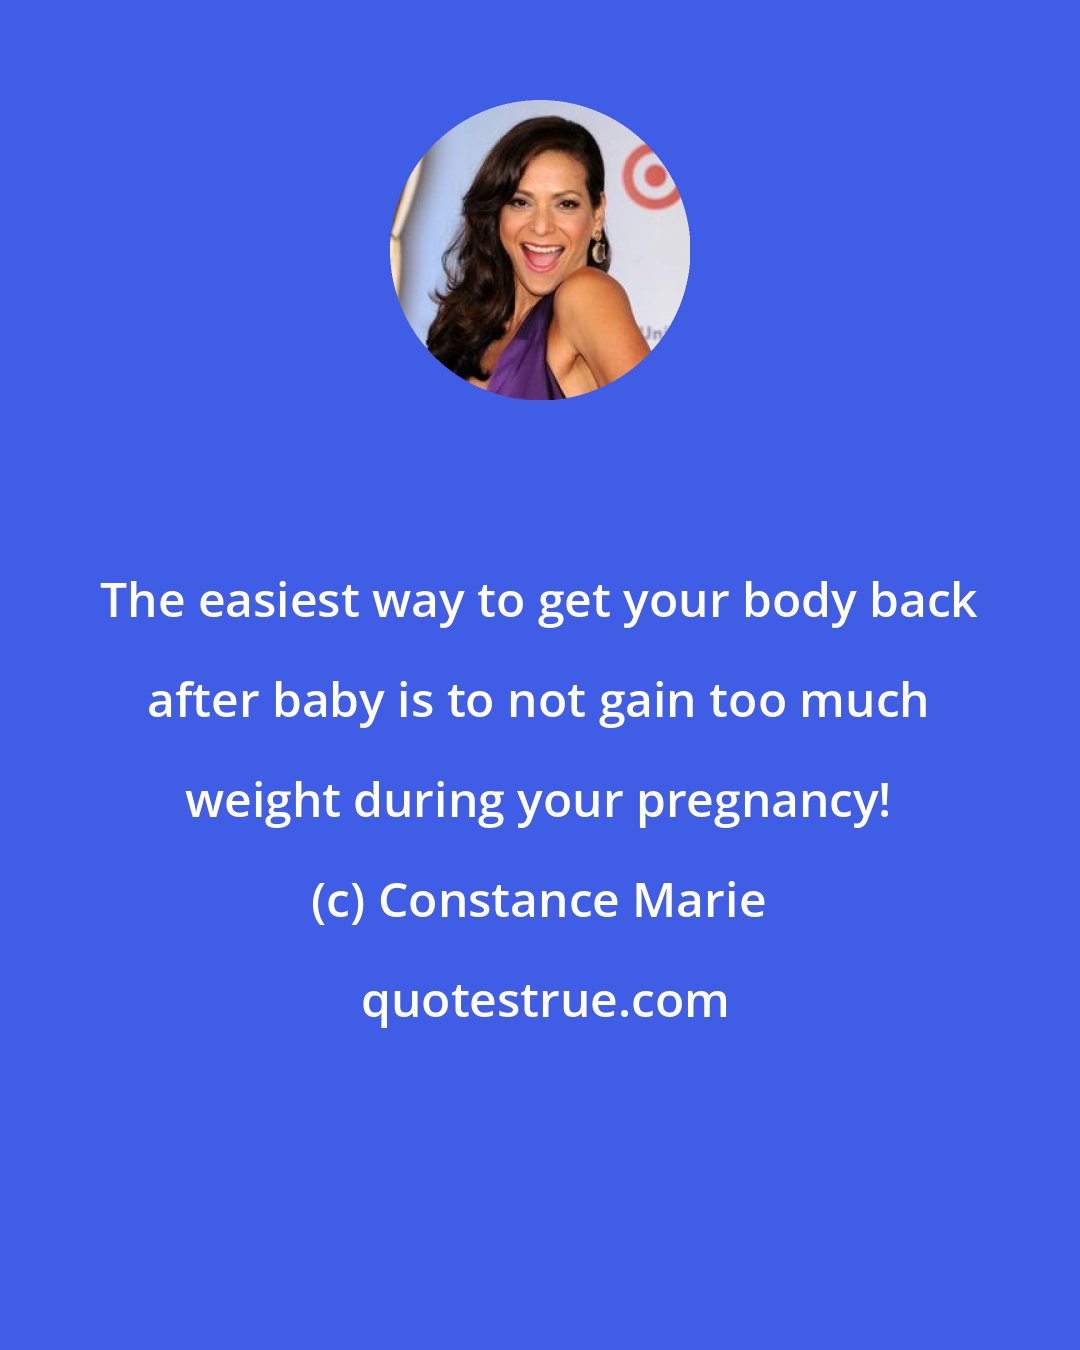 Constance Marie: The easiest way to get your body back after baby is to not gain too much weight during your pregnancy!